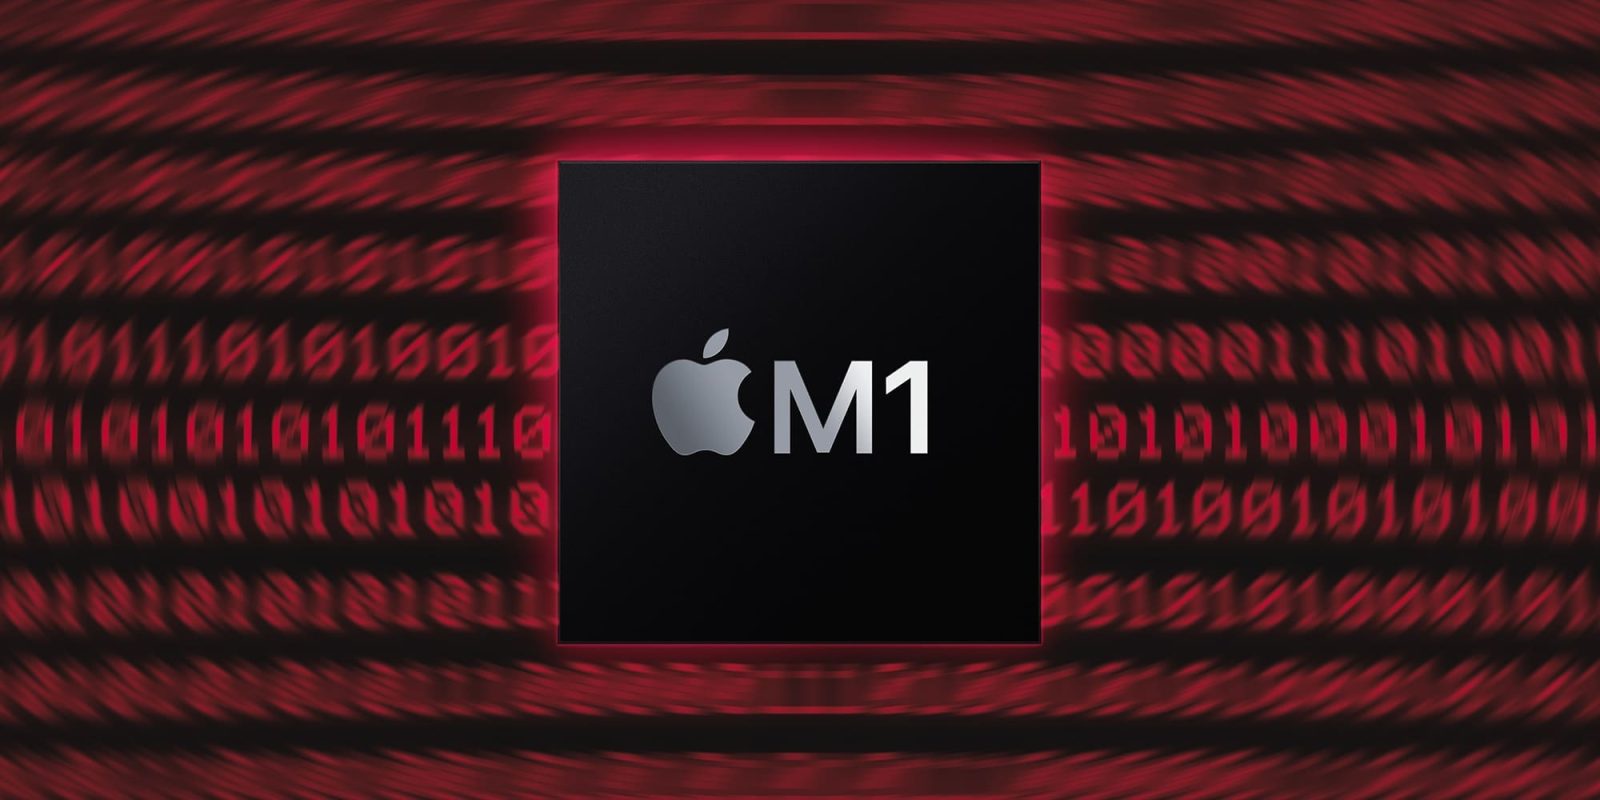 PACMAN M1 chip defeats last line of Apple Silicon security